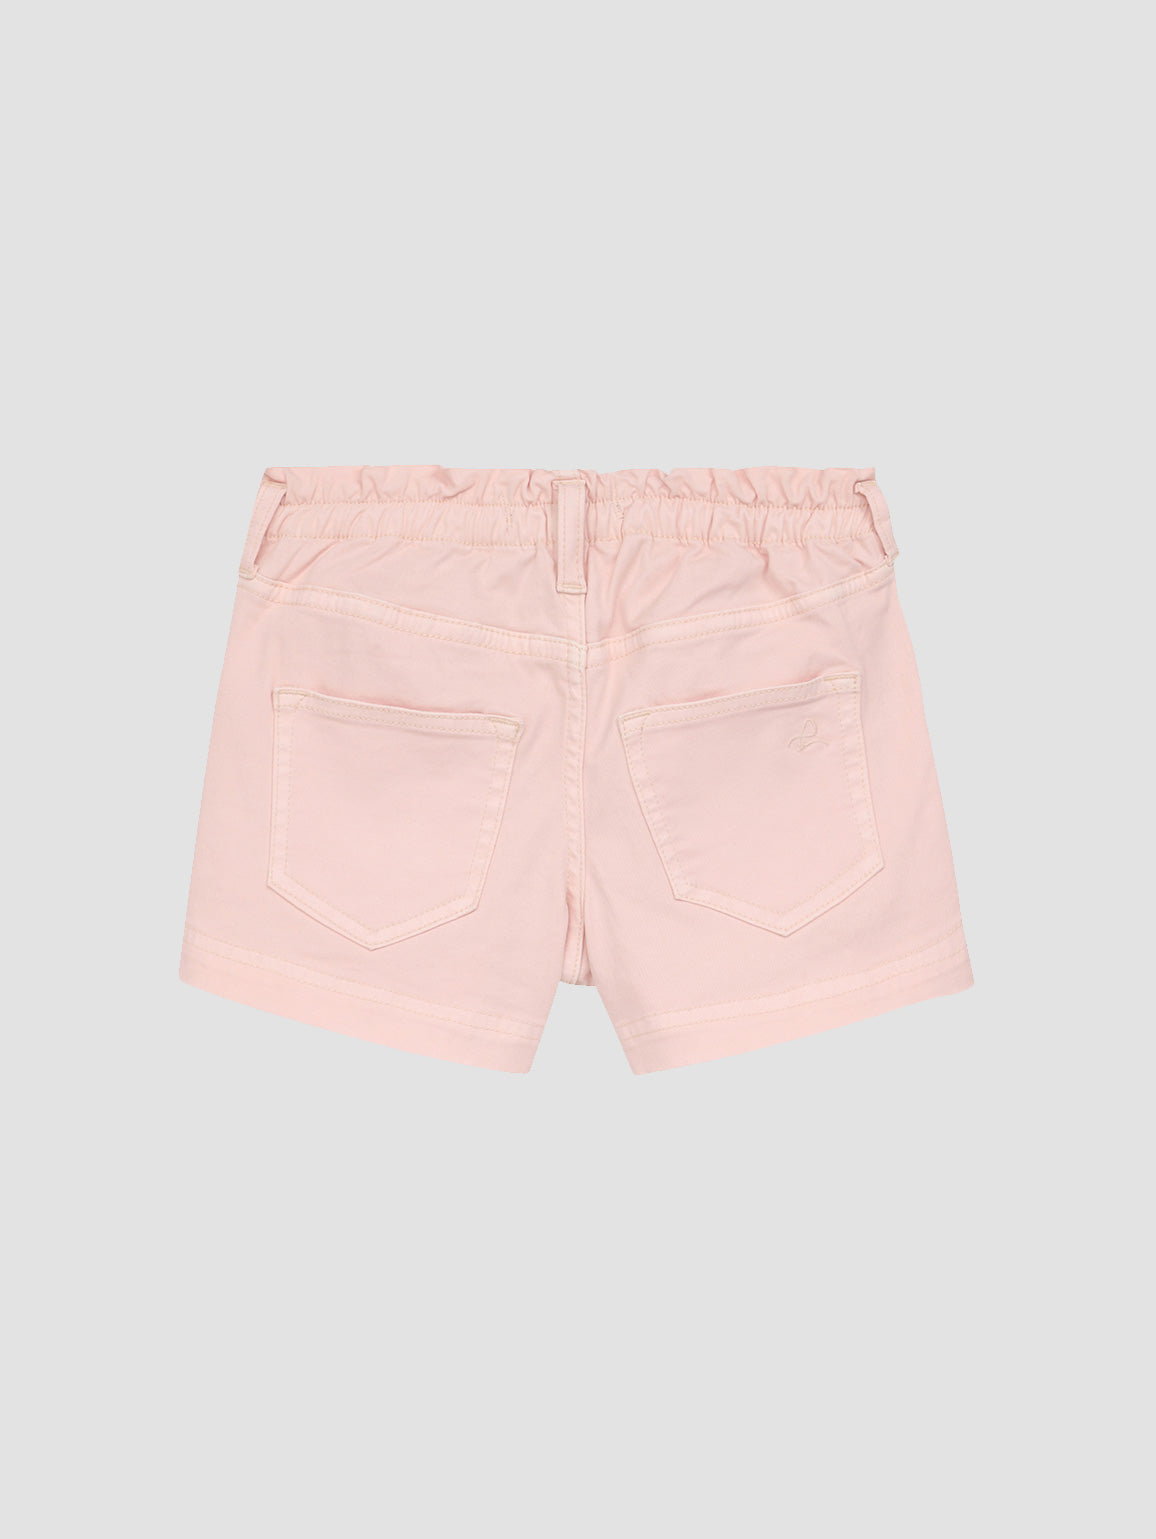 Lucy Jean Short | Pink Peony